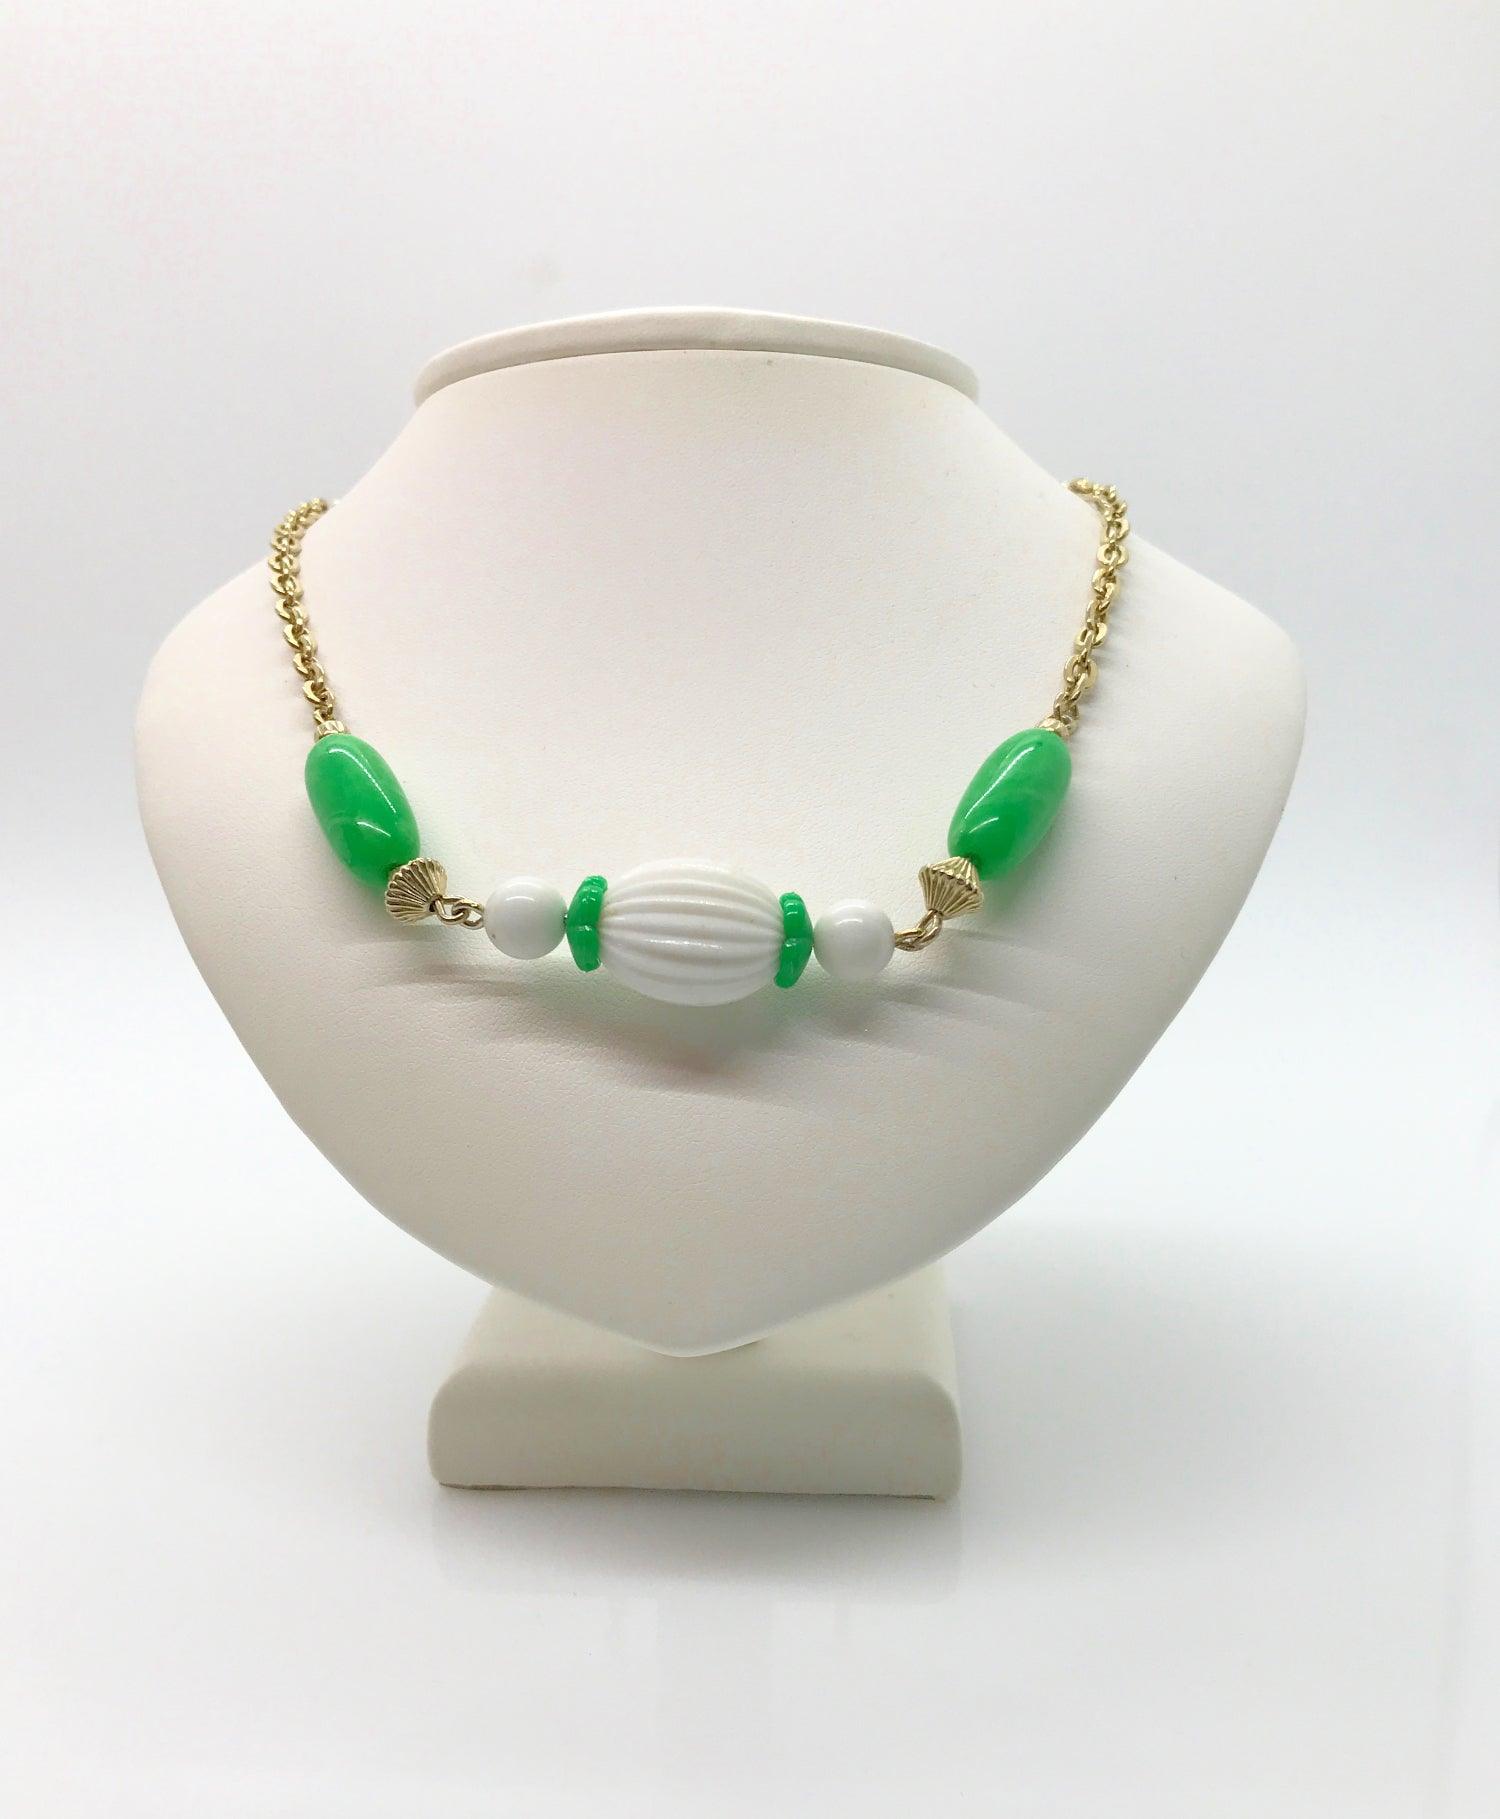 Vintage Avon "Come Summer" Necklace with Green and White Beads (1975) - Lamoree’s Vintage